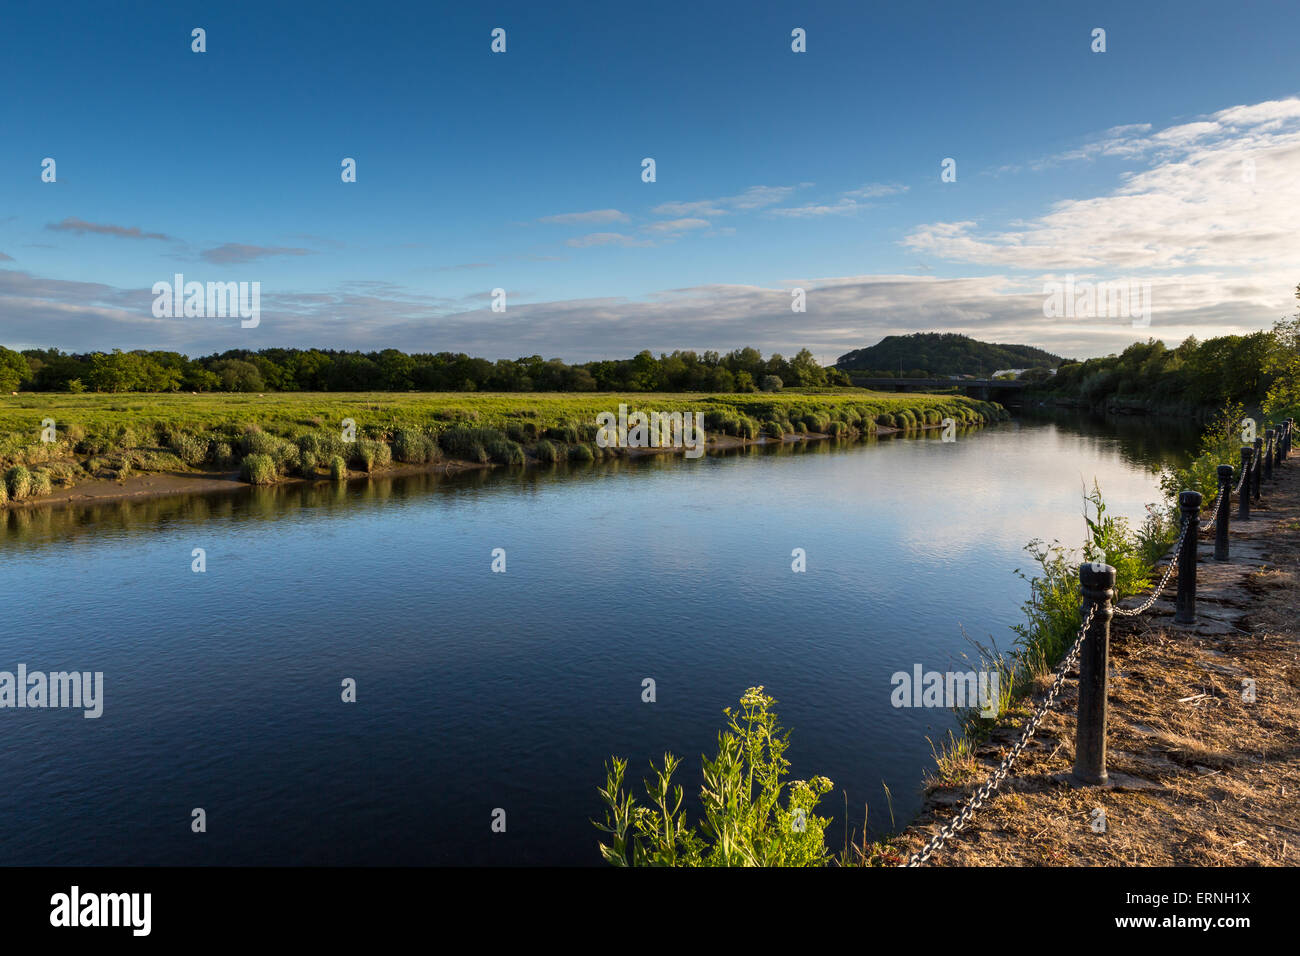 The River Tywi (Towy) at Caerfyrddin / Carmarthen, looking west on a calm, peaceful evening Stock Photo